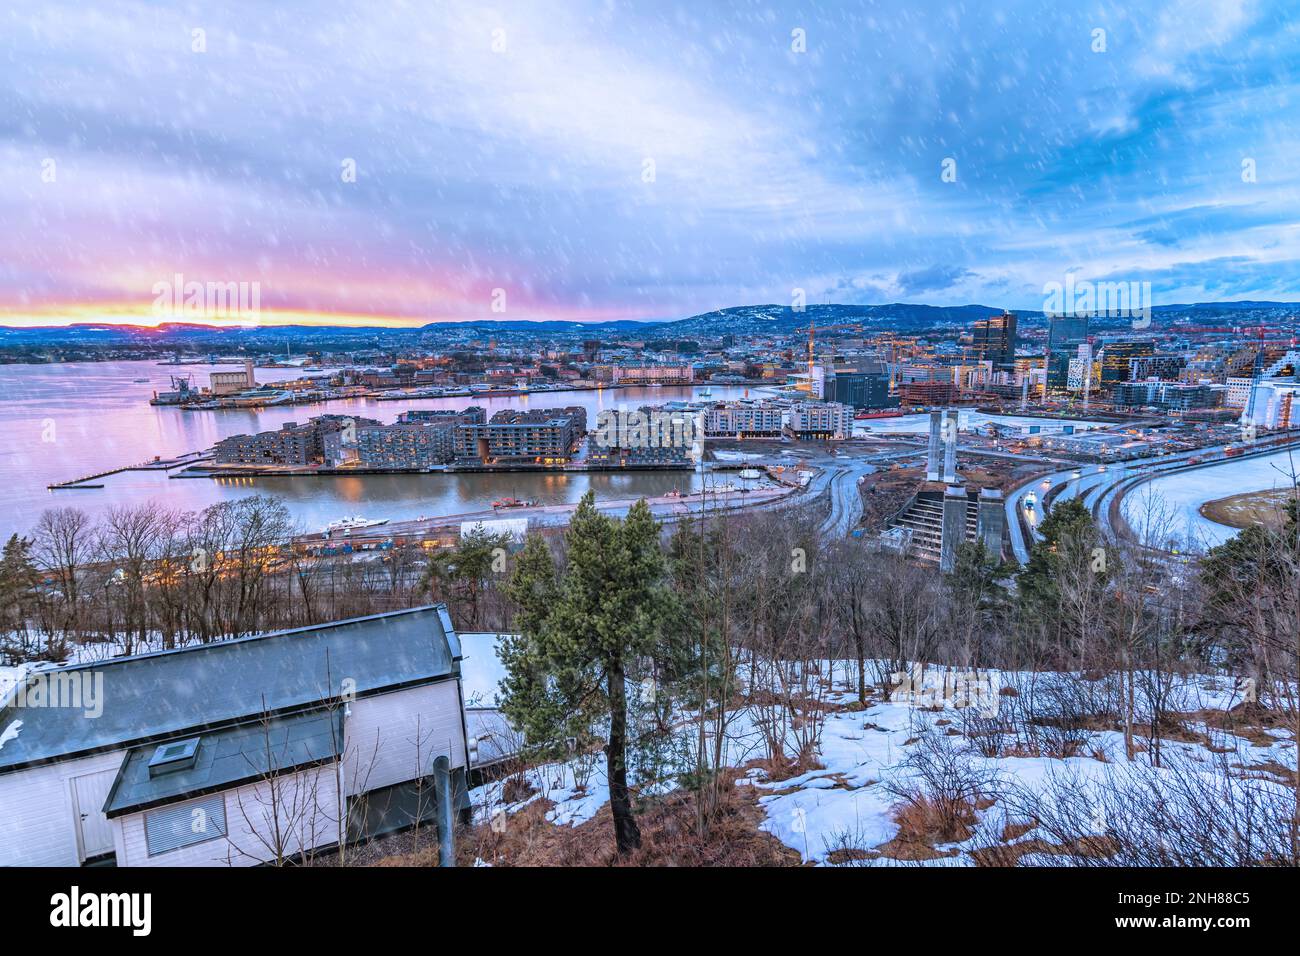 Oslo Norway, sunset city skyline at business district and Barcode Project Stock Photo